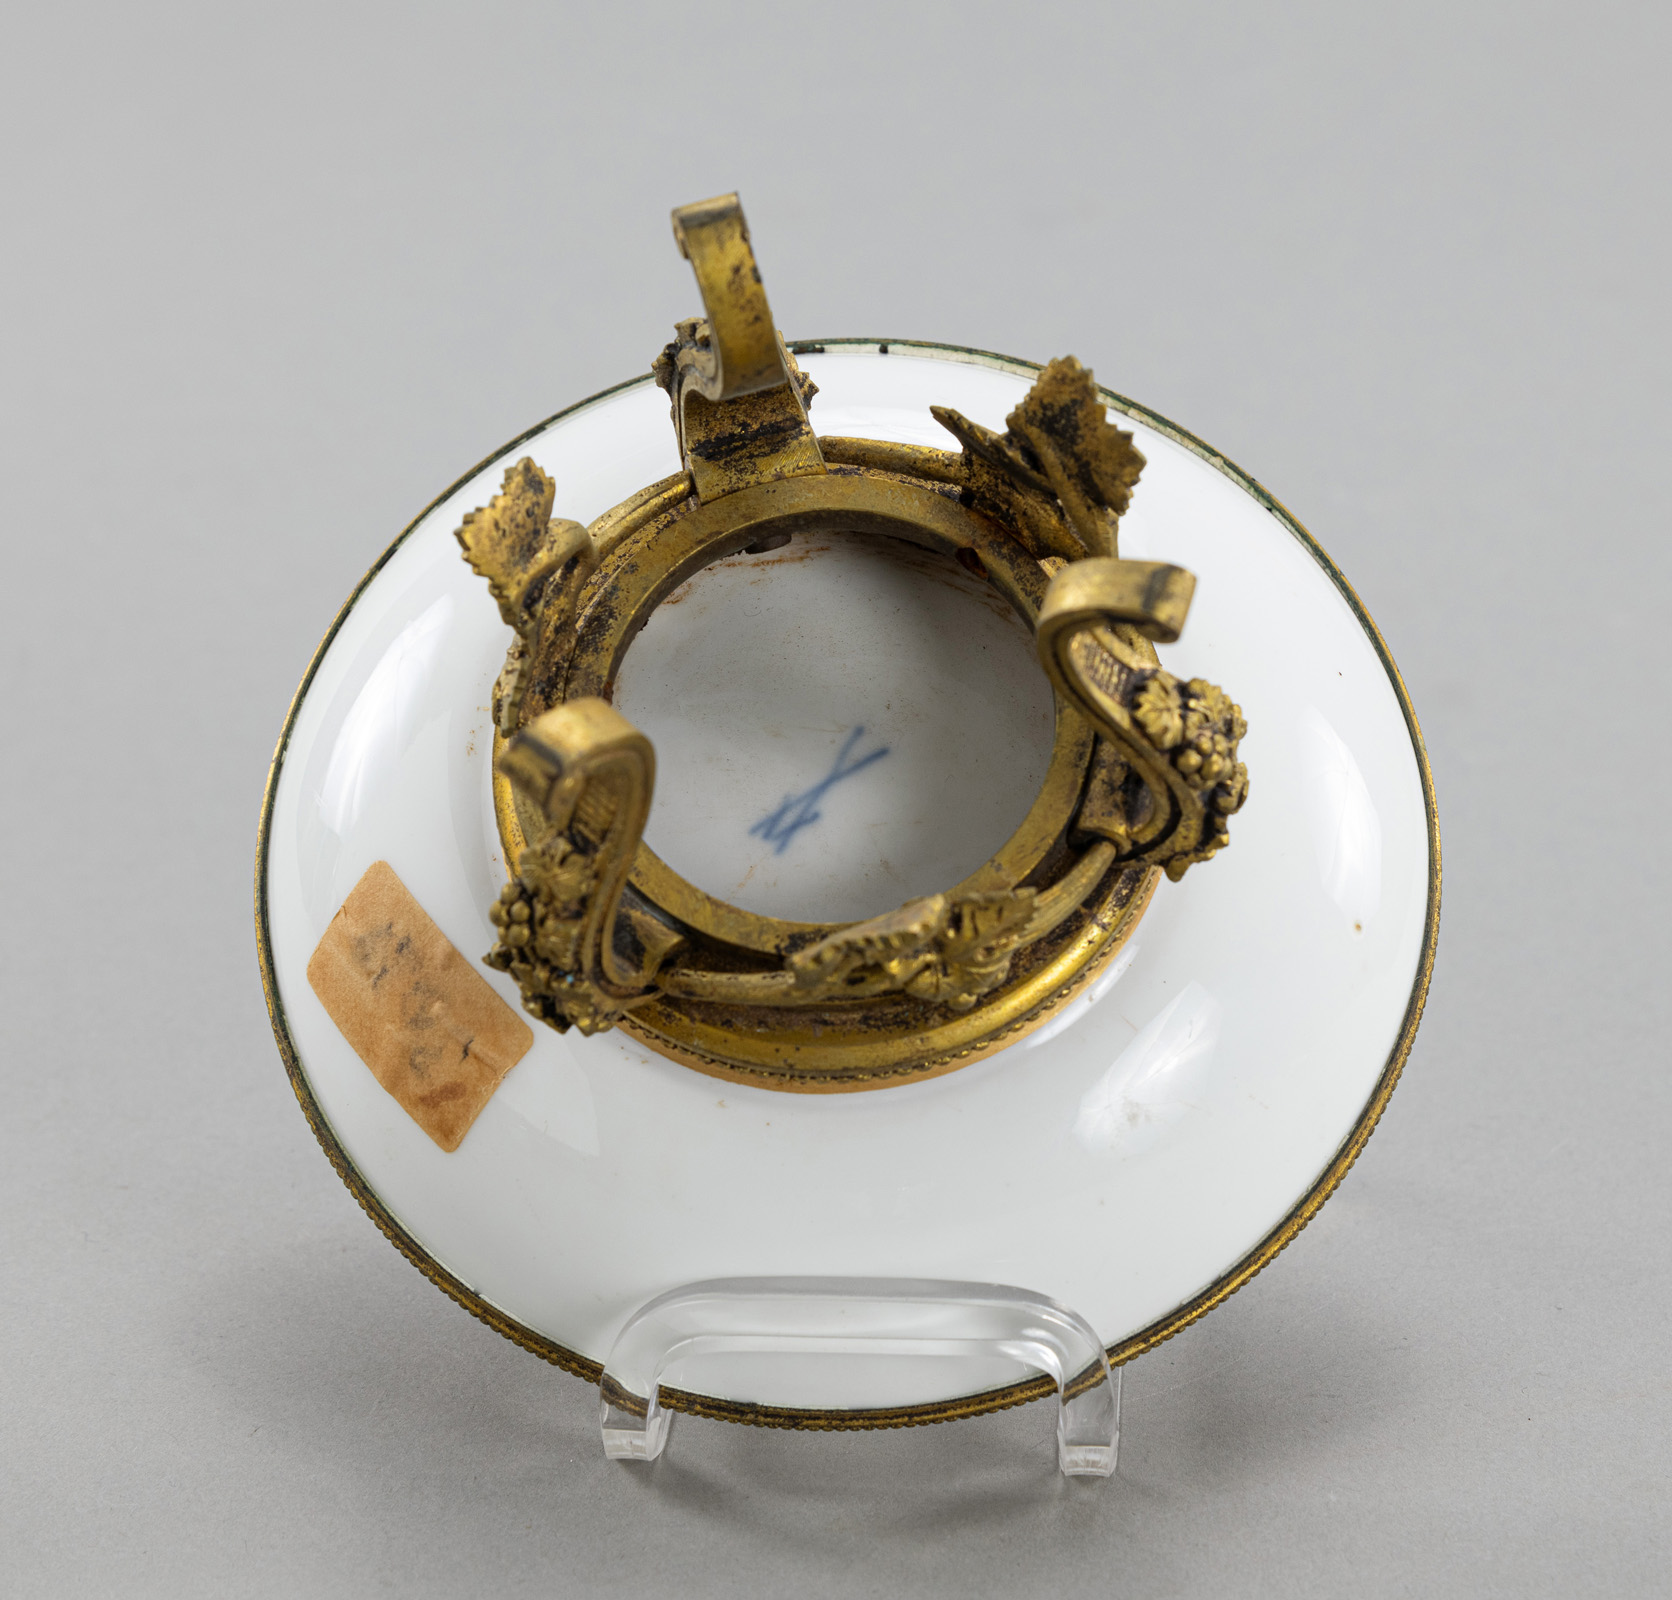 A GILT-METAL-MOUNTED MEISSEN SAUCER - Image 4 of 4